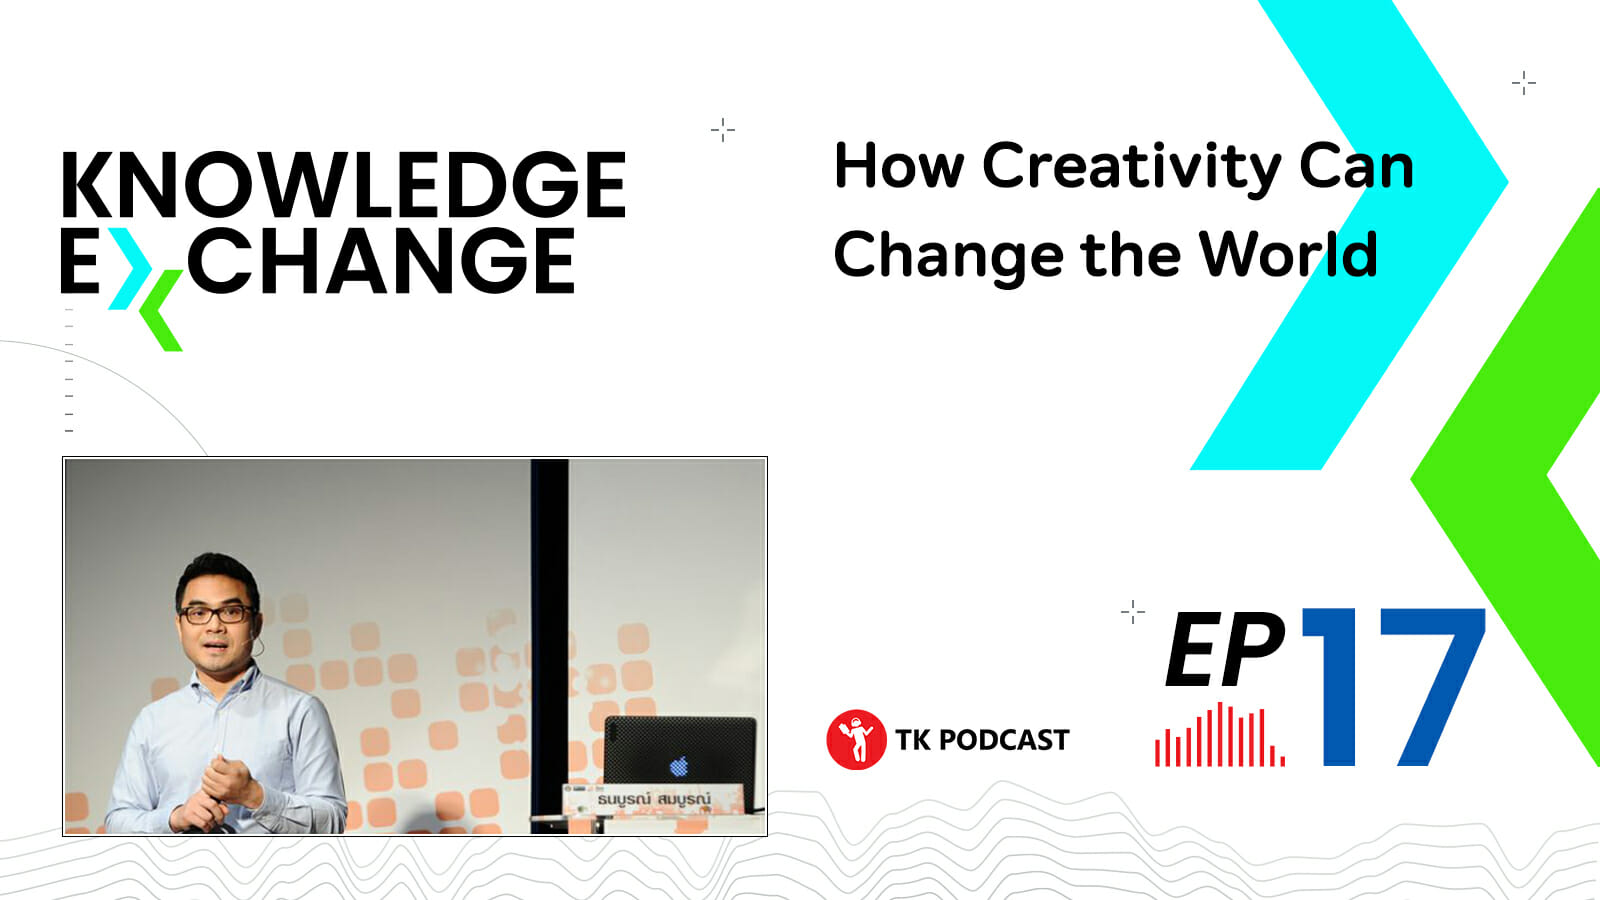 How Creativity Can Change the World